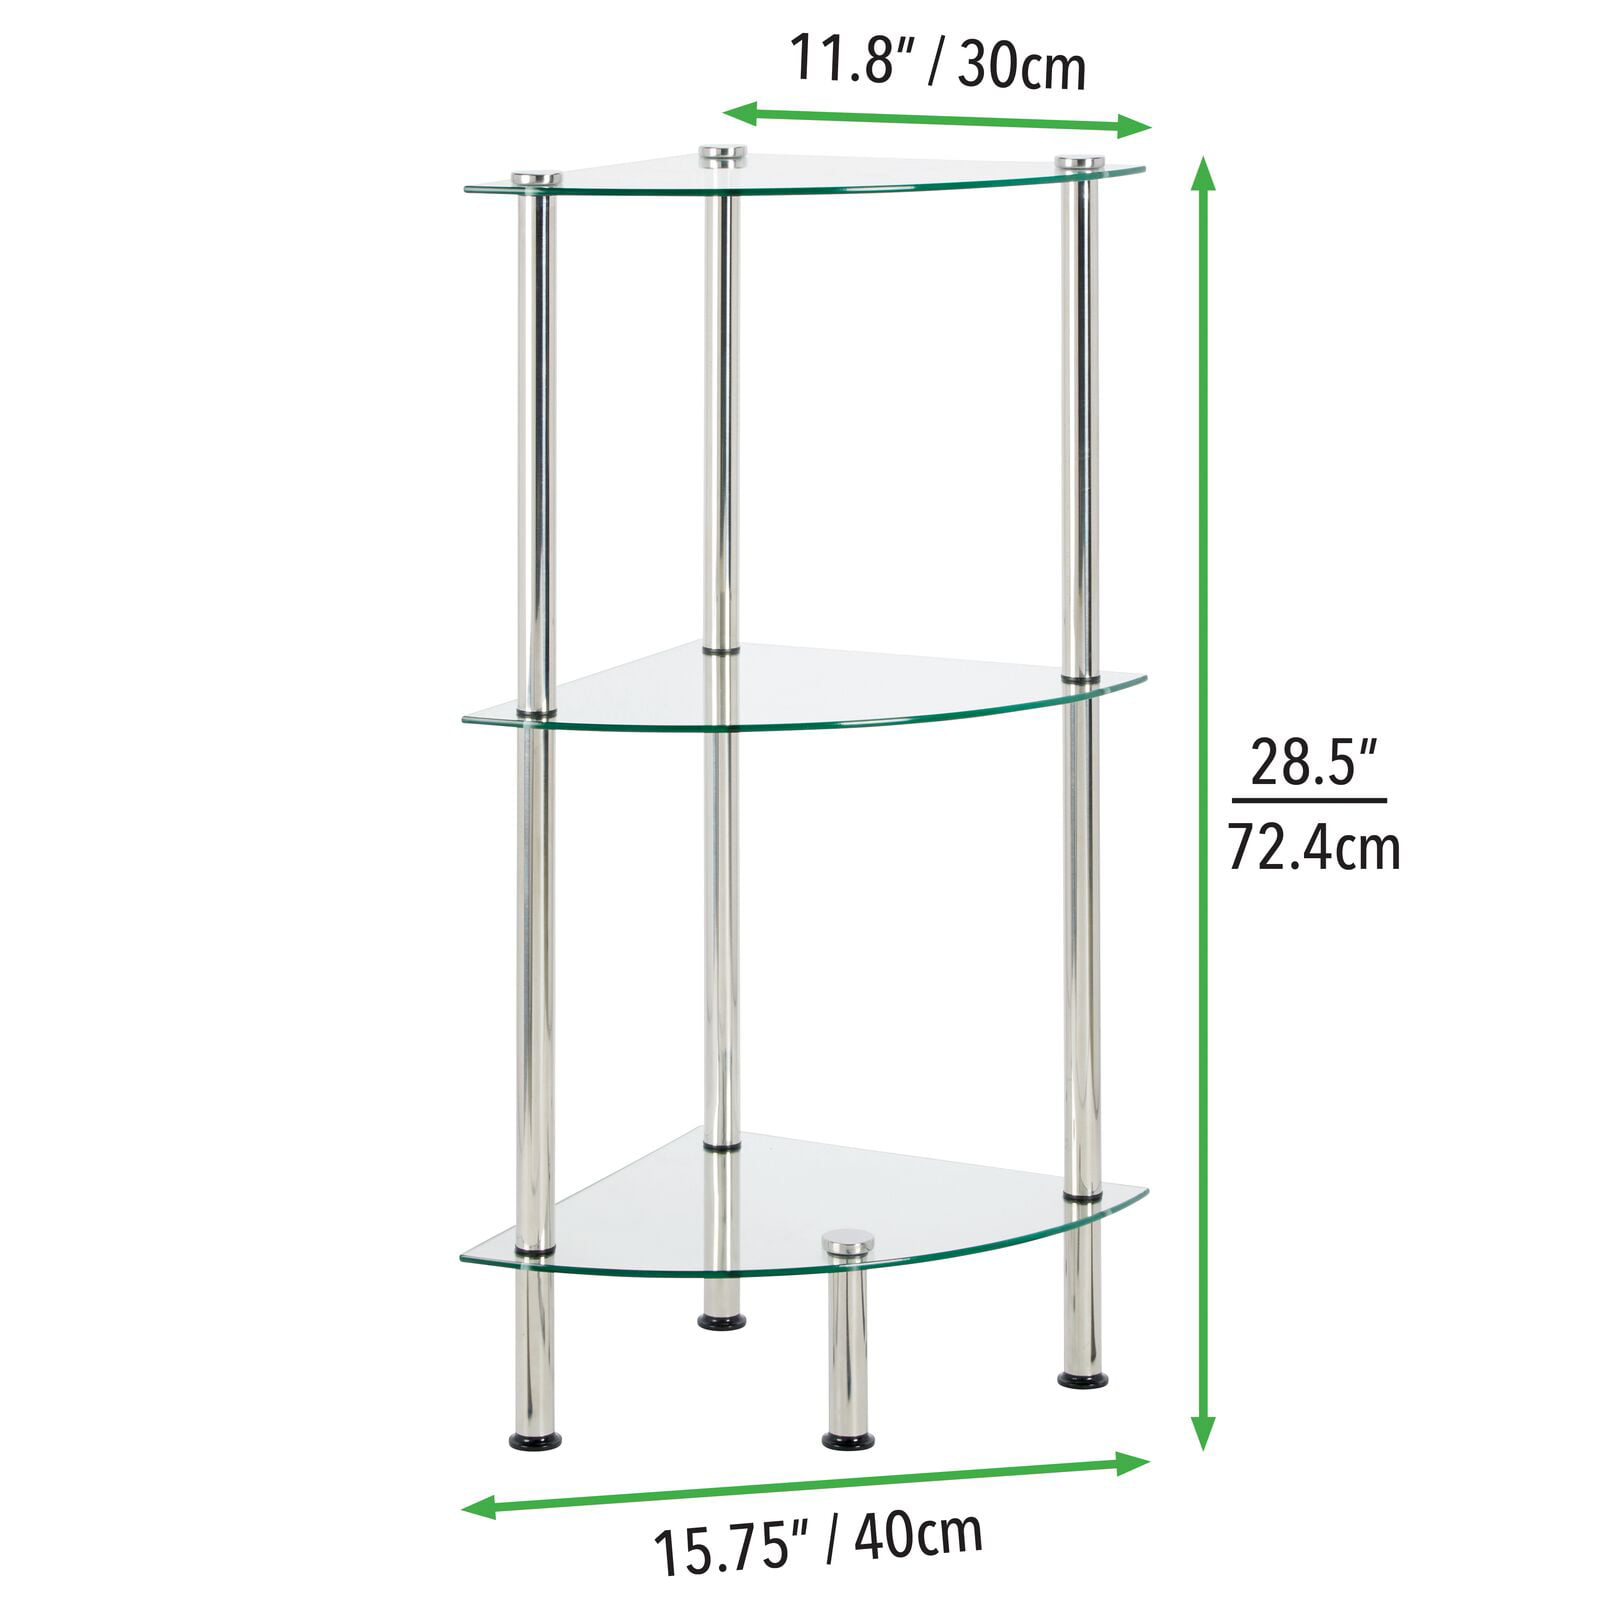 mDesign Bathroom Floor Storage Corner Tower, 3 Tier Open Glass Shelves -  Compact Shelving Display Unit - Multi-Use Home Organizer for Bath, Office,  